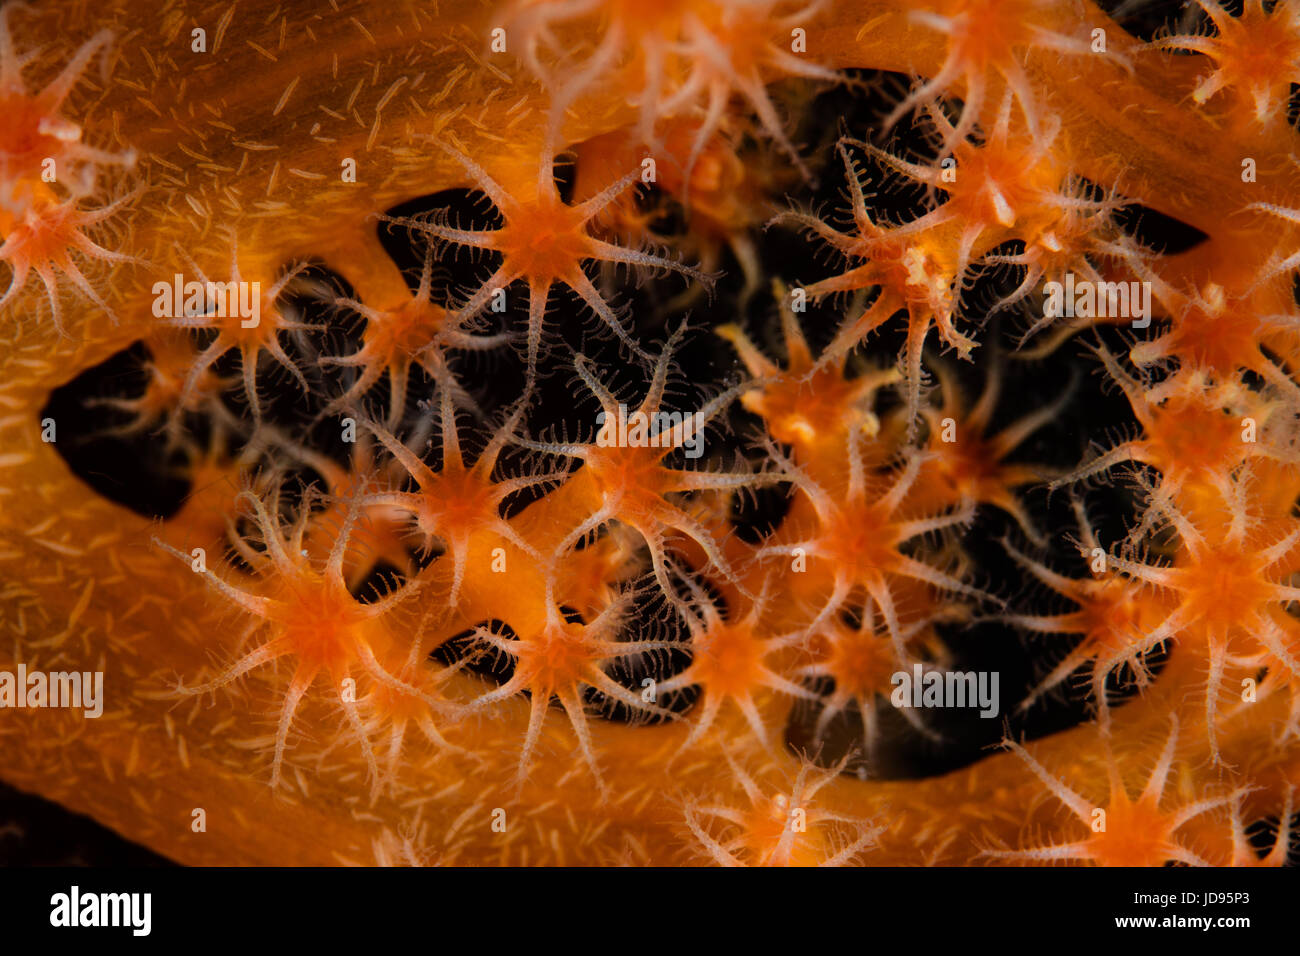 Detail of orange soft coral polyps growing on a reef in Raja Ampat, Indonesia. This remote region is known for its extraordinary marine biodiversity. Stock Photo